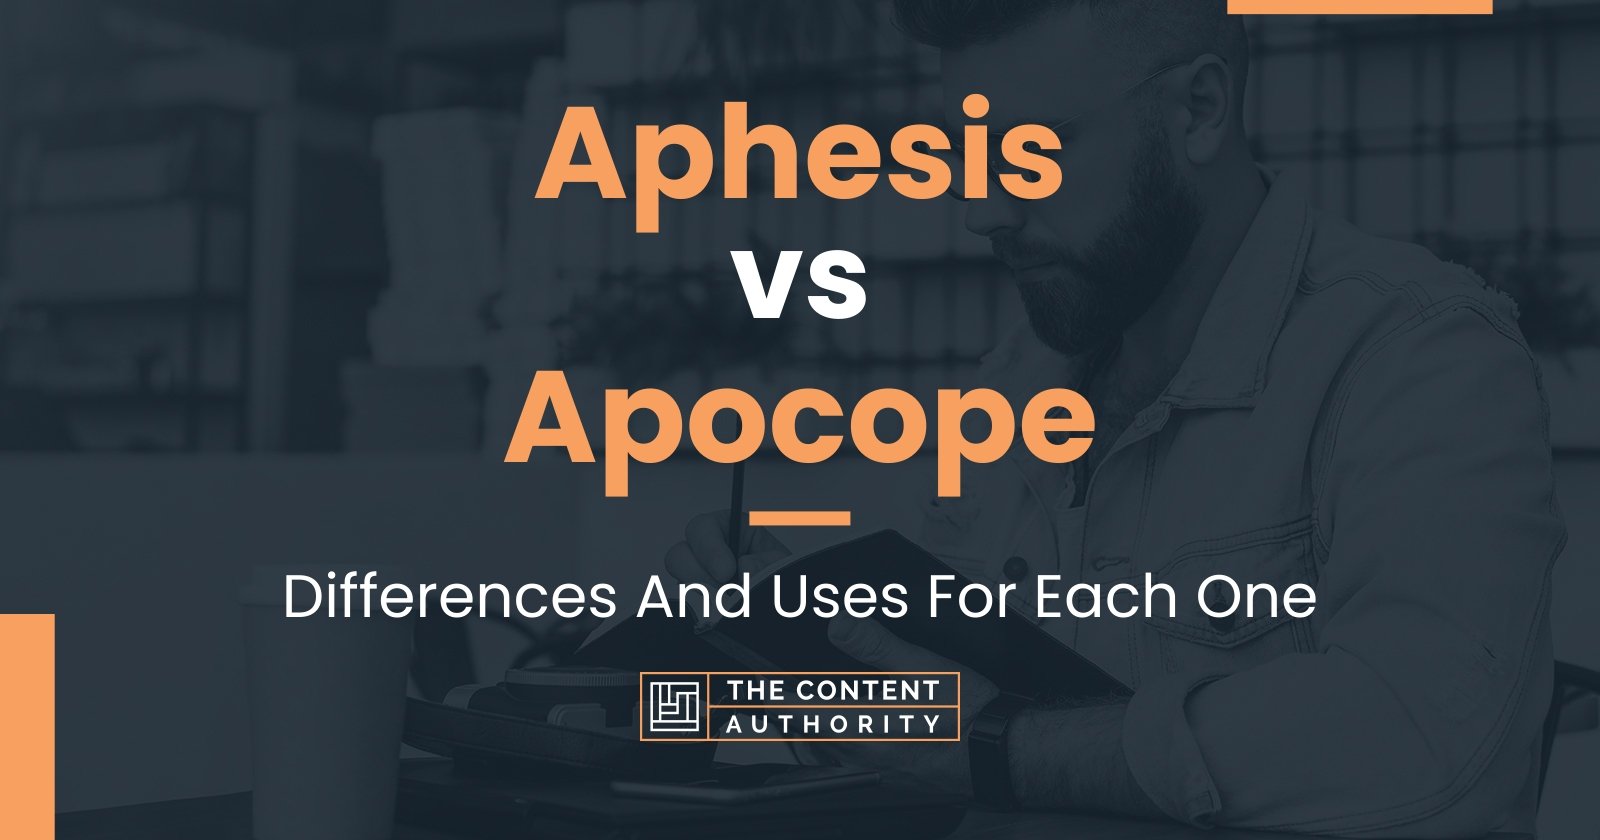 Aphesis vs Apocope: Differences And Uses For Each One